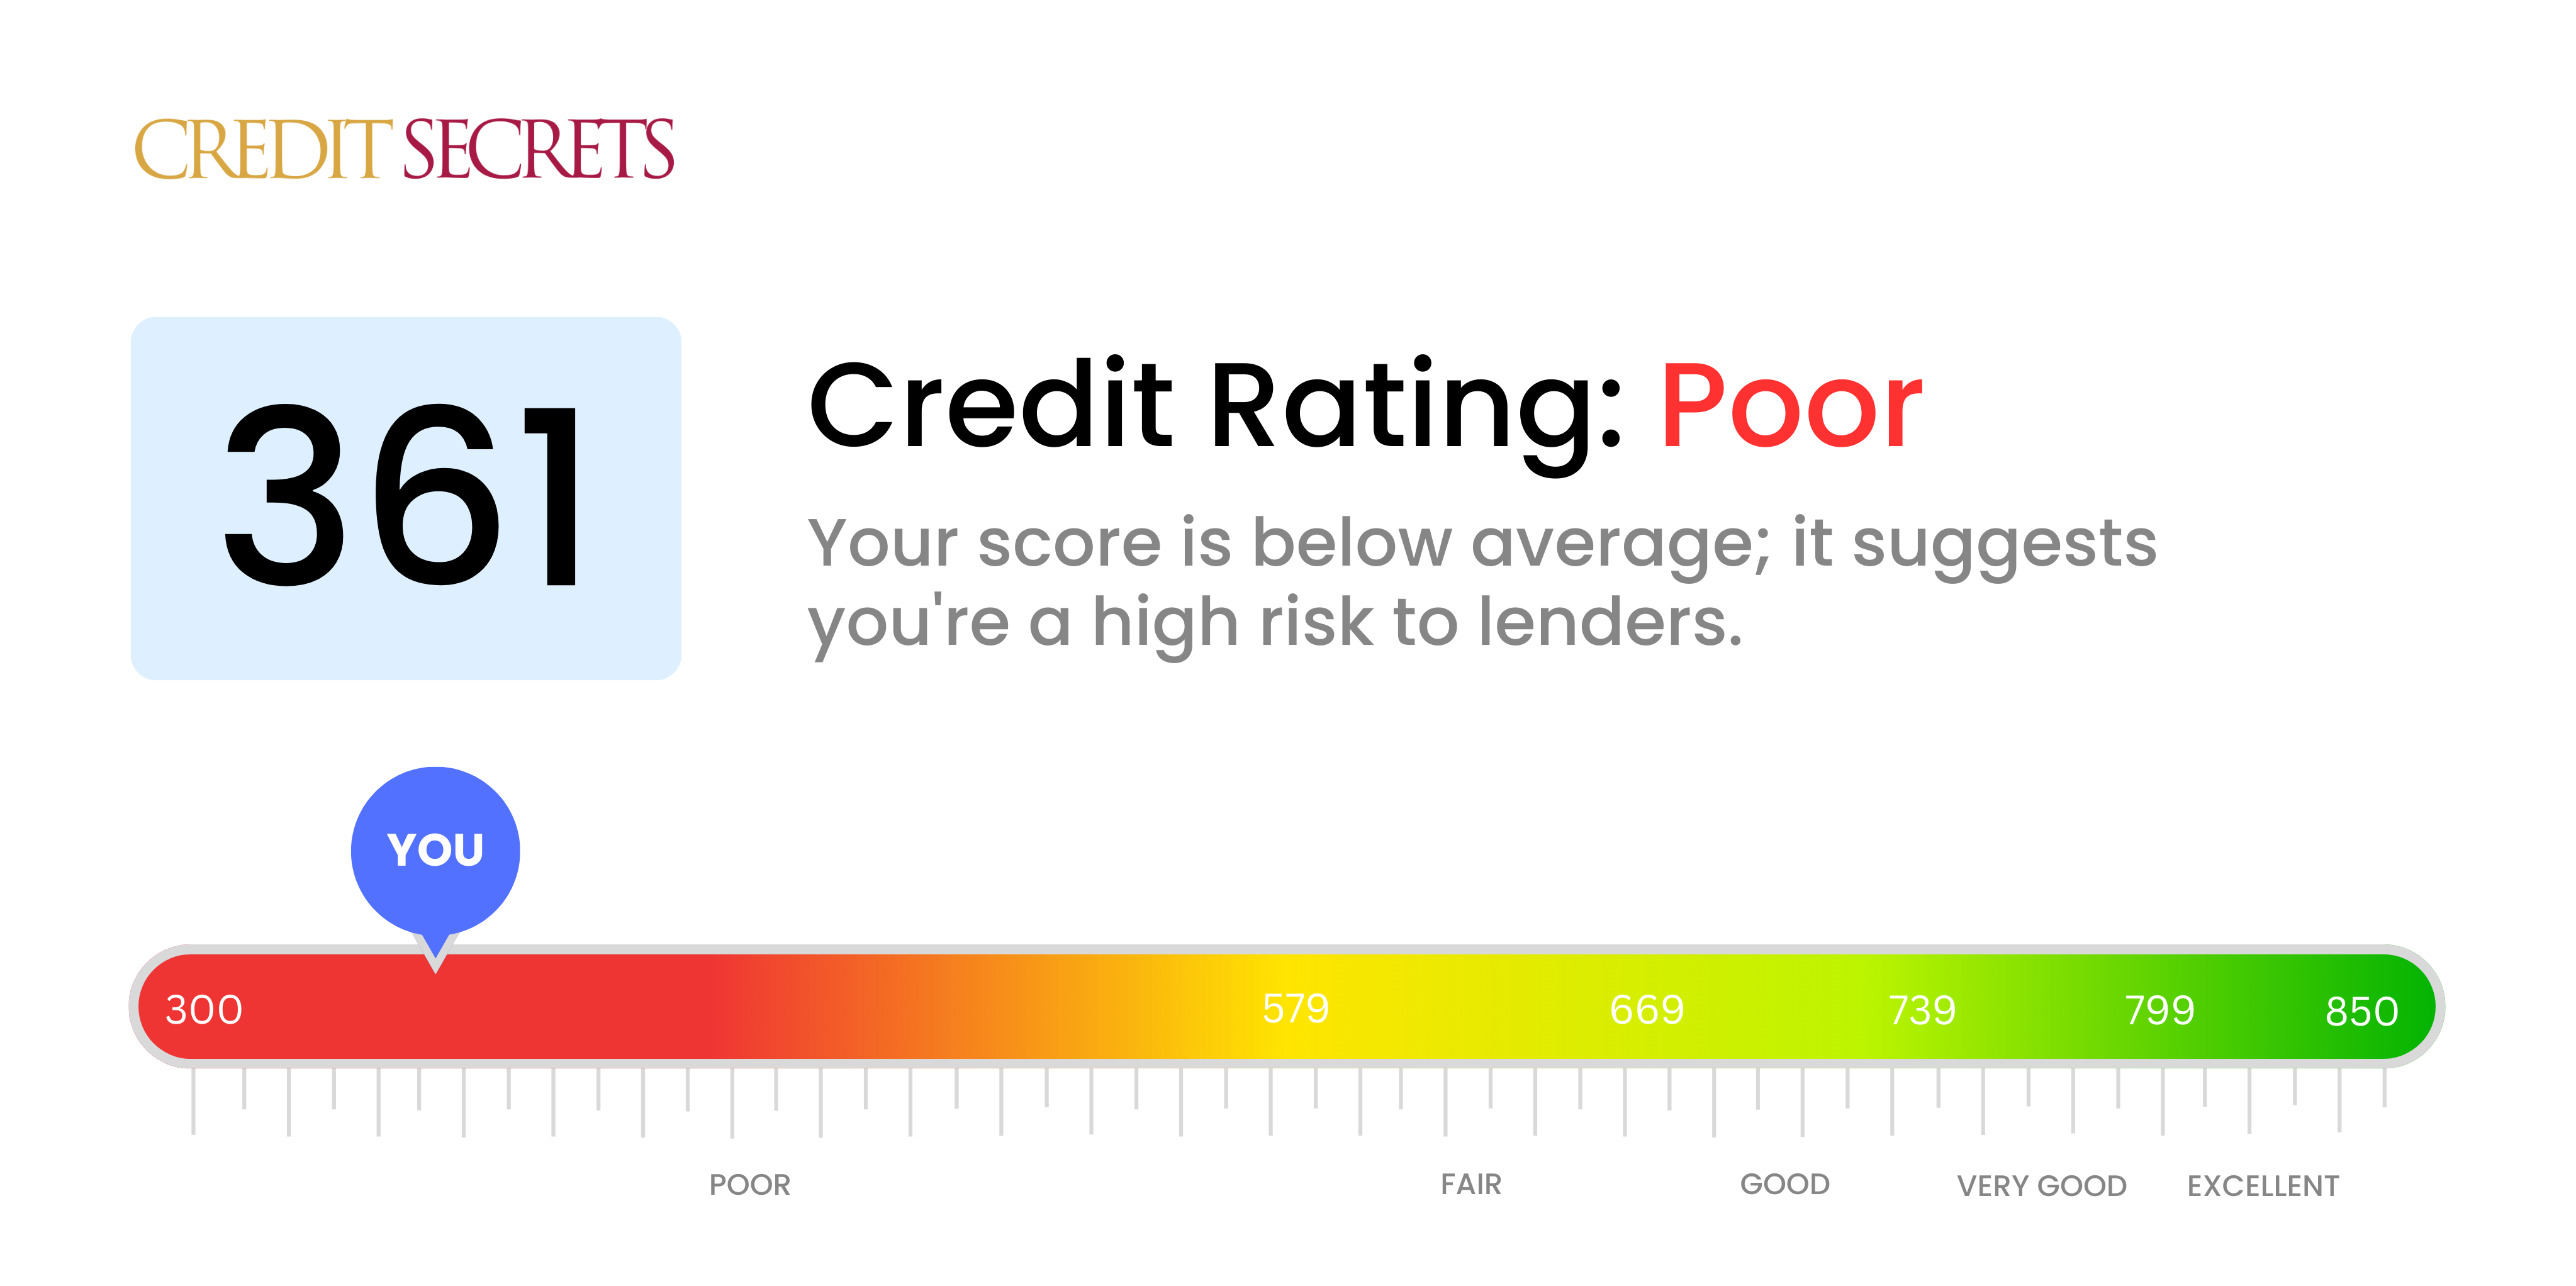 Is 361 a good credit score?